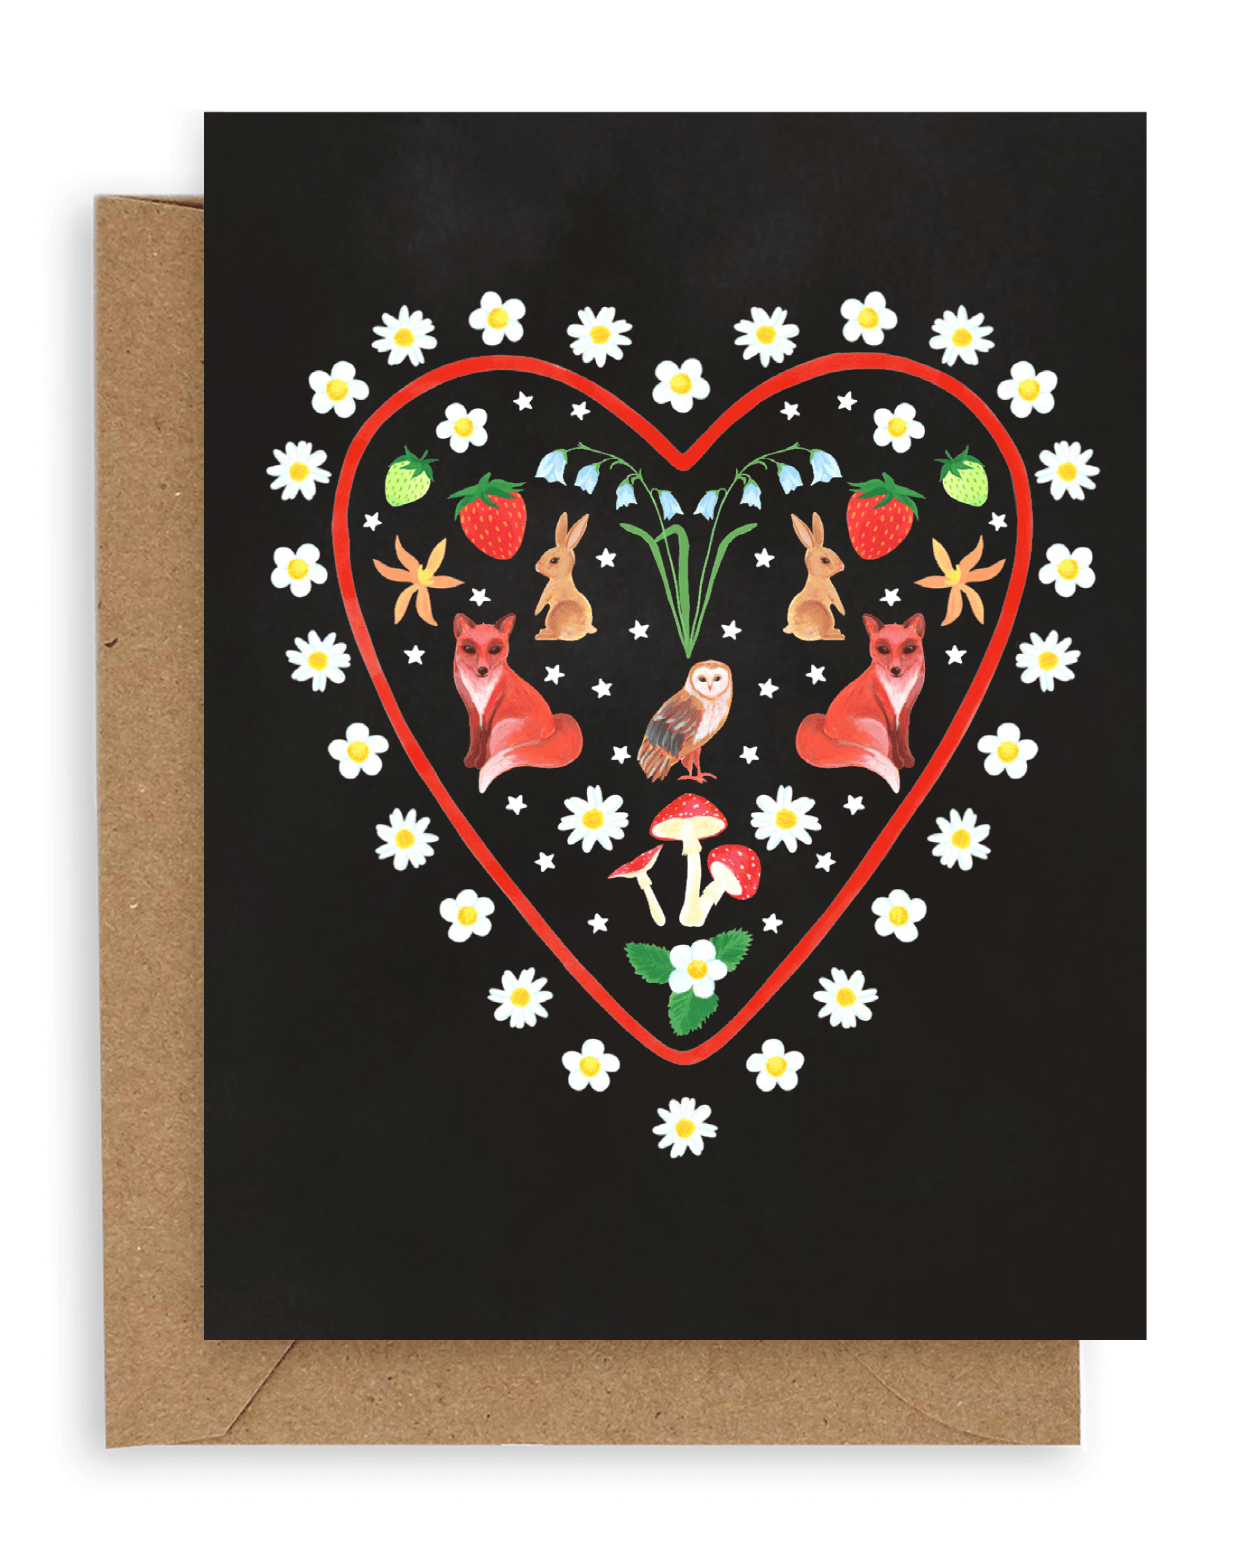 A red heart-shaped outline surrounded by white flowers with two foxes facing away from each other, two rabbits facing opposite above them, and an owl in the middle with forest flowers above, red mushrooms and white flowers below, and strawberries/flowers above. Printed on a black background. Shown with Kraft envelope.